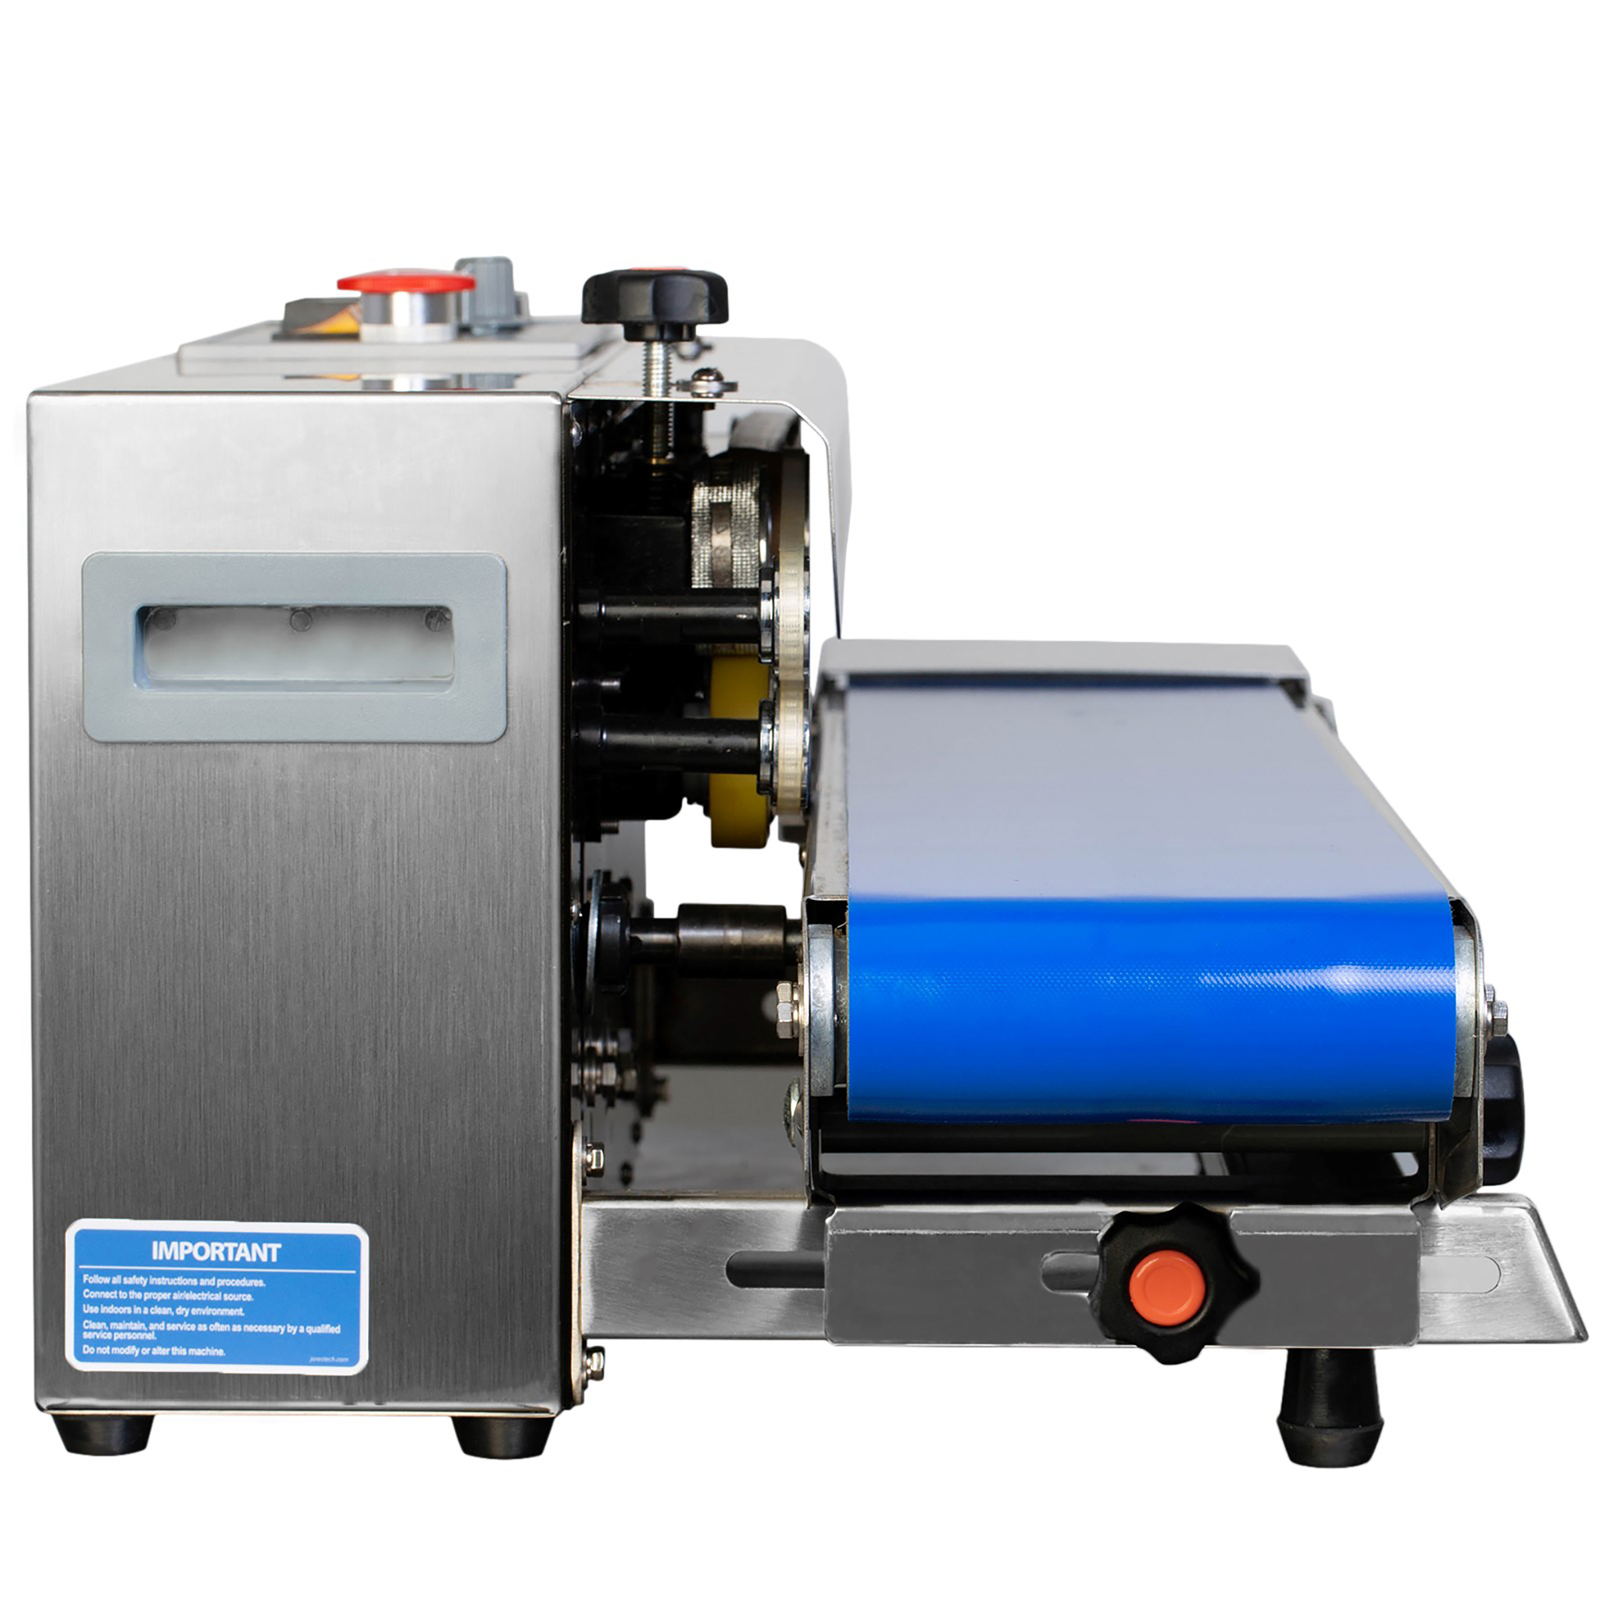 side view of stainless steel continuous band sealing machine with blue band. Also shows the knob to adjust the position of the band.